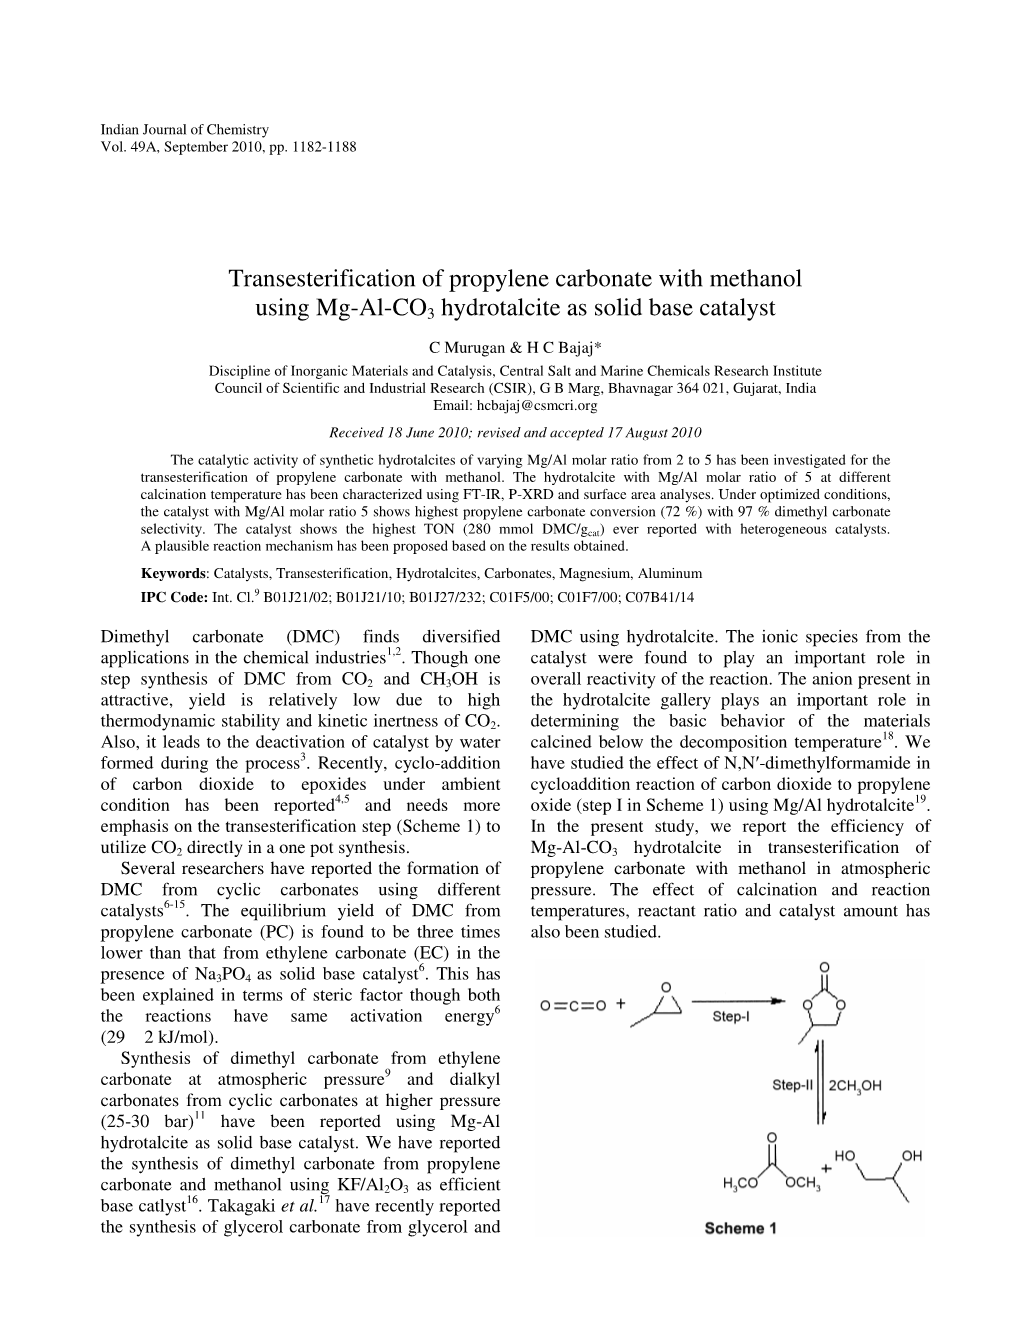 Transesterification of Propylene Carbonate with Methanol Using Mg-Al-CO 3 Hydrotalcite As Solid Base Catalyst